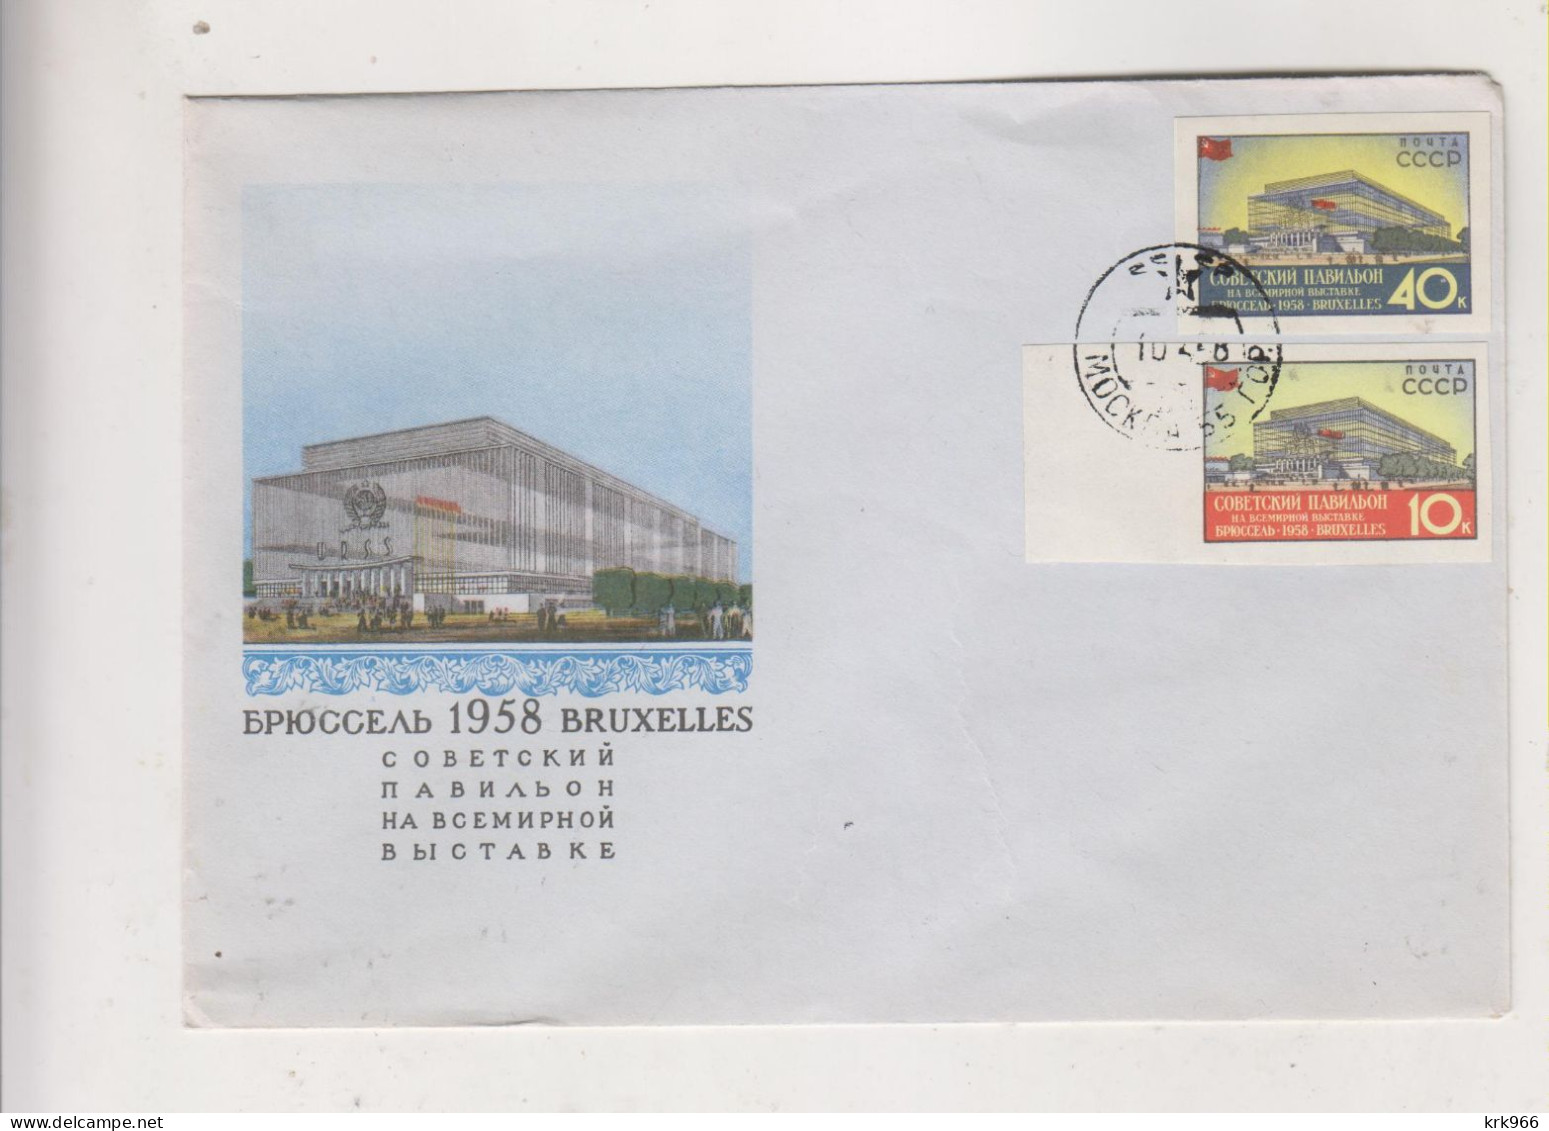 RUSSIA 1958 MOSKVA MOSCOW Nice FDC Cover BRUXELLES EXPO - Covers & Documents